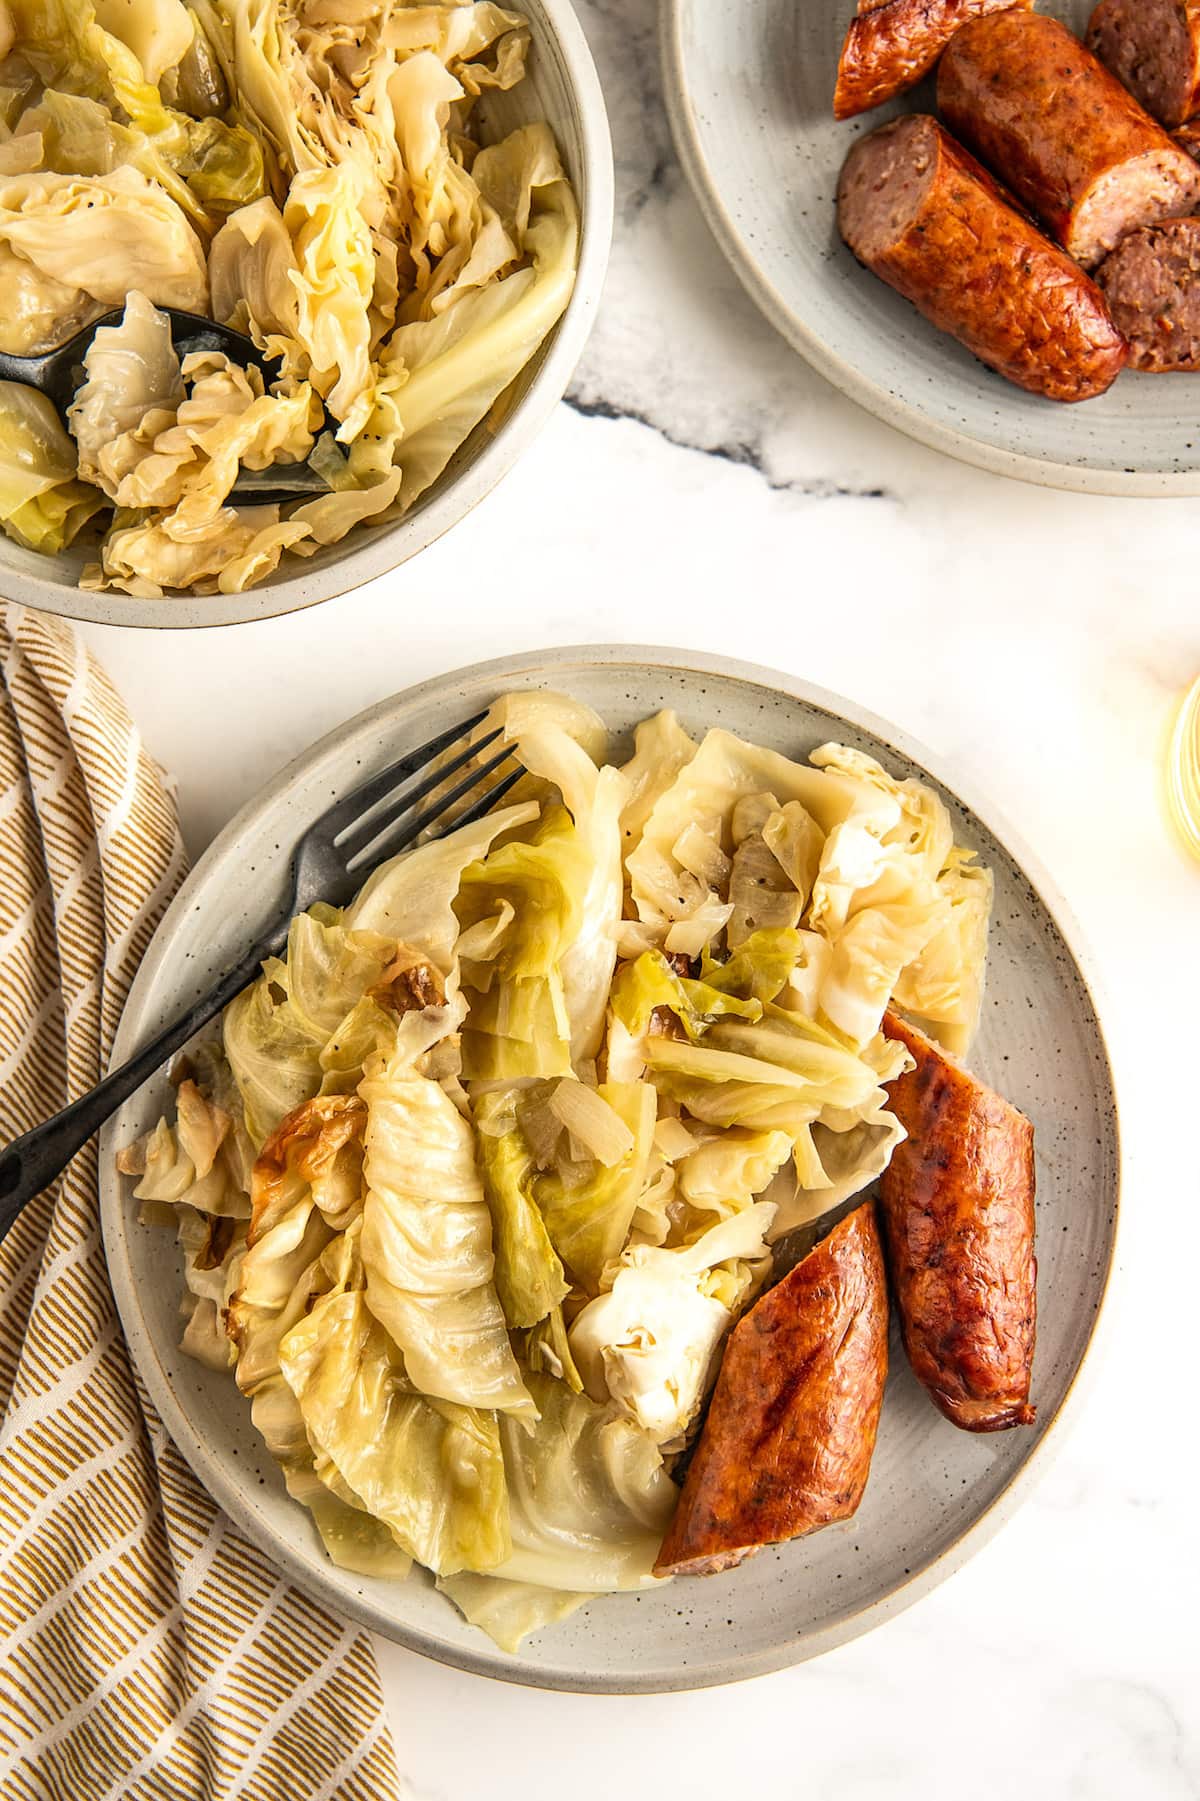 A plate of sausage and cooked cabbage.